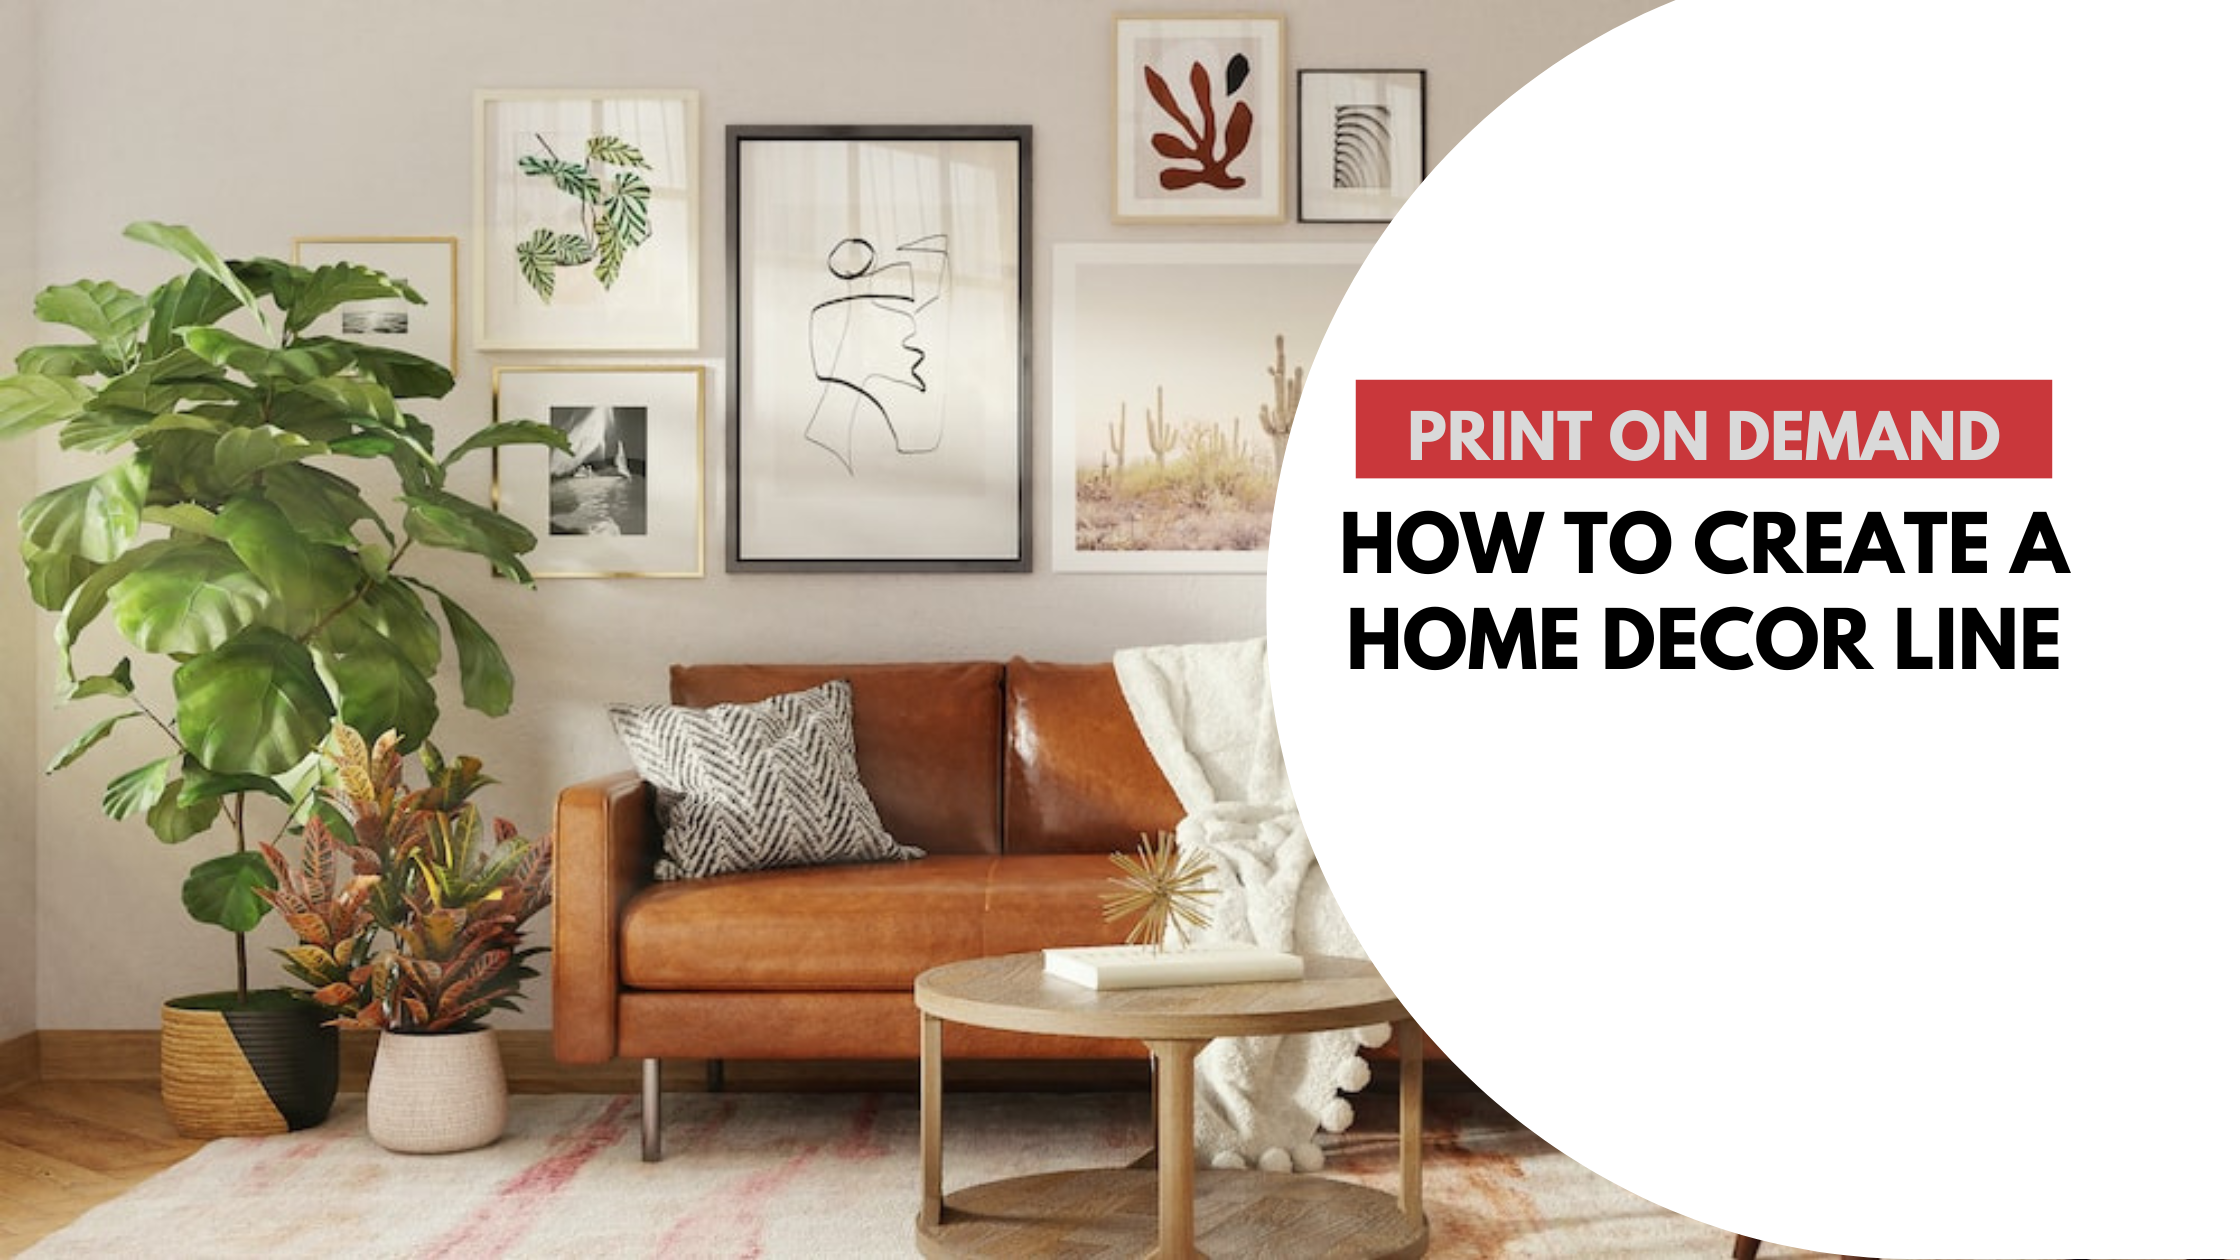 How to Create a Successful Print on Demand Home Decor Line (print on demand, home decor, success)